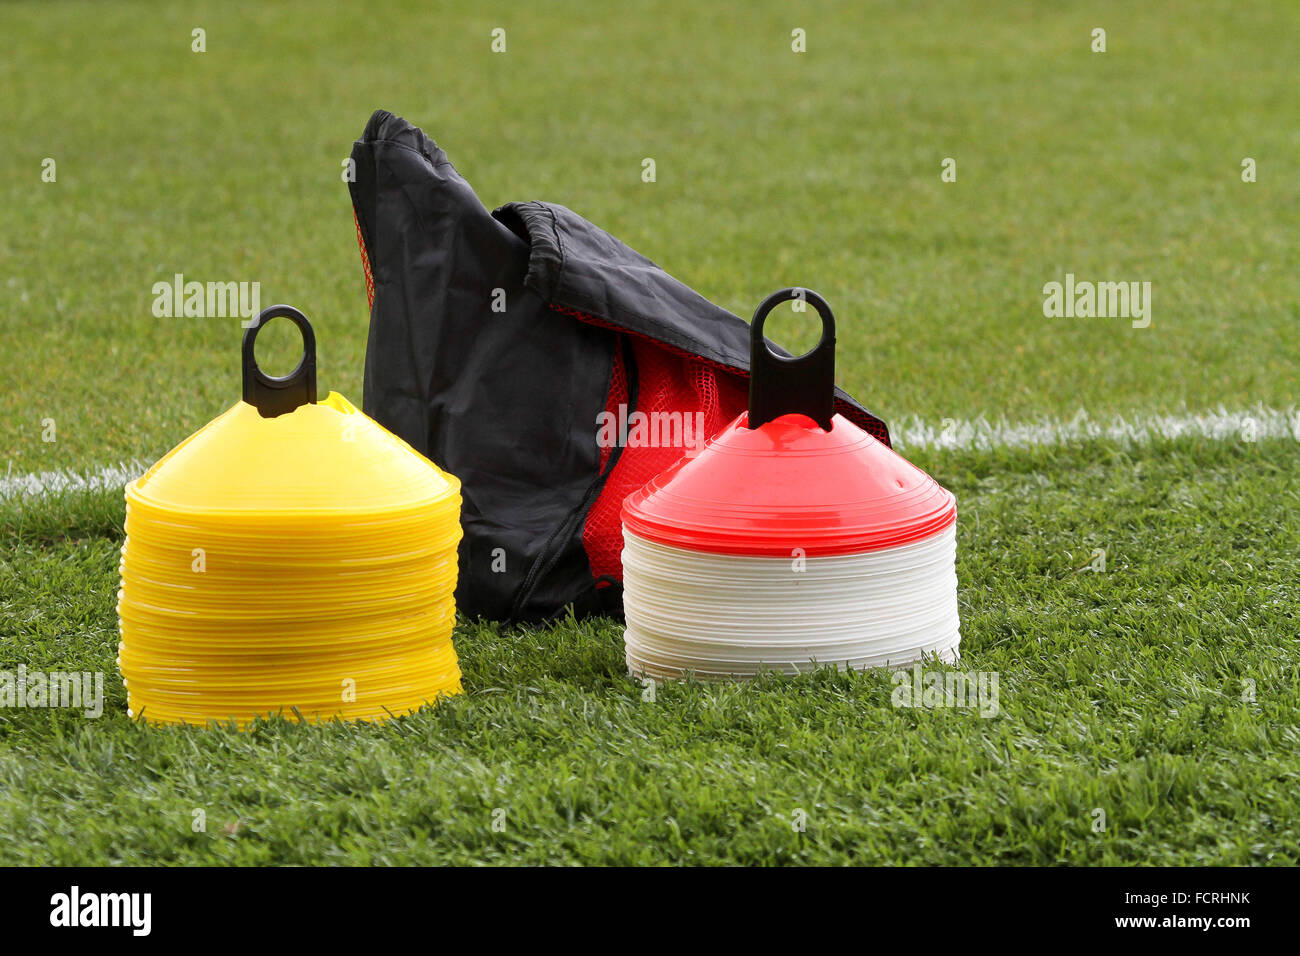 Football training cones used in training sessions and pre-match warm-ups. Stock Photo